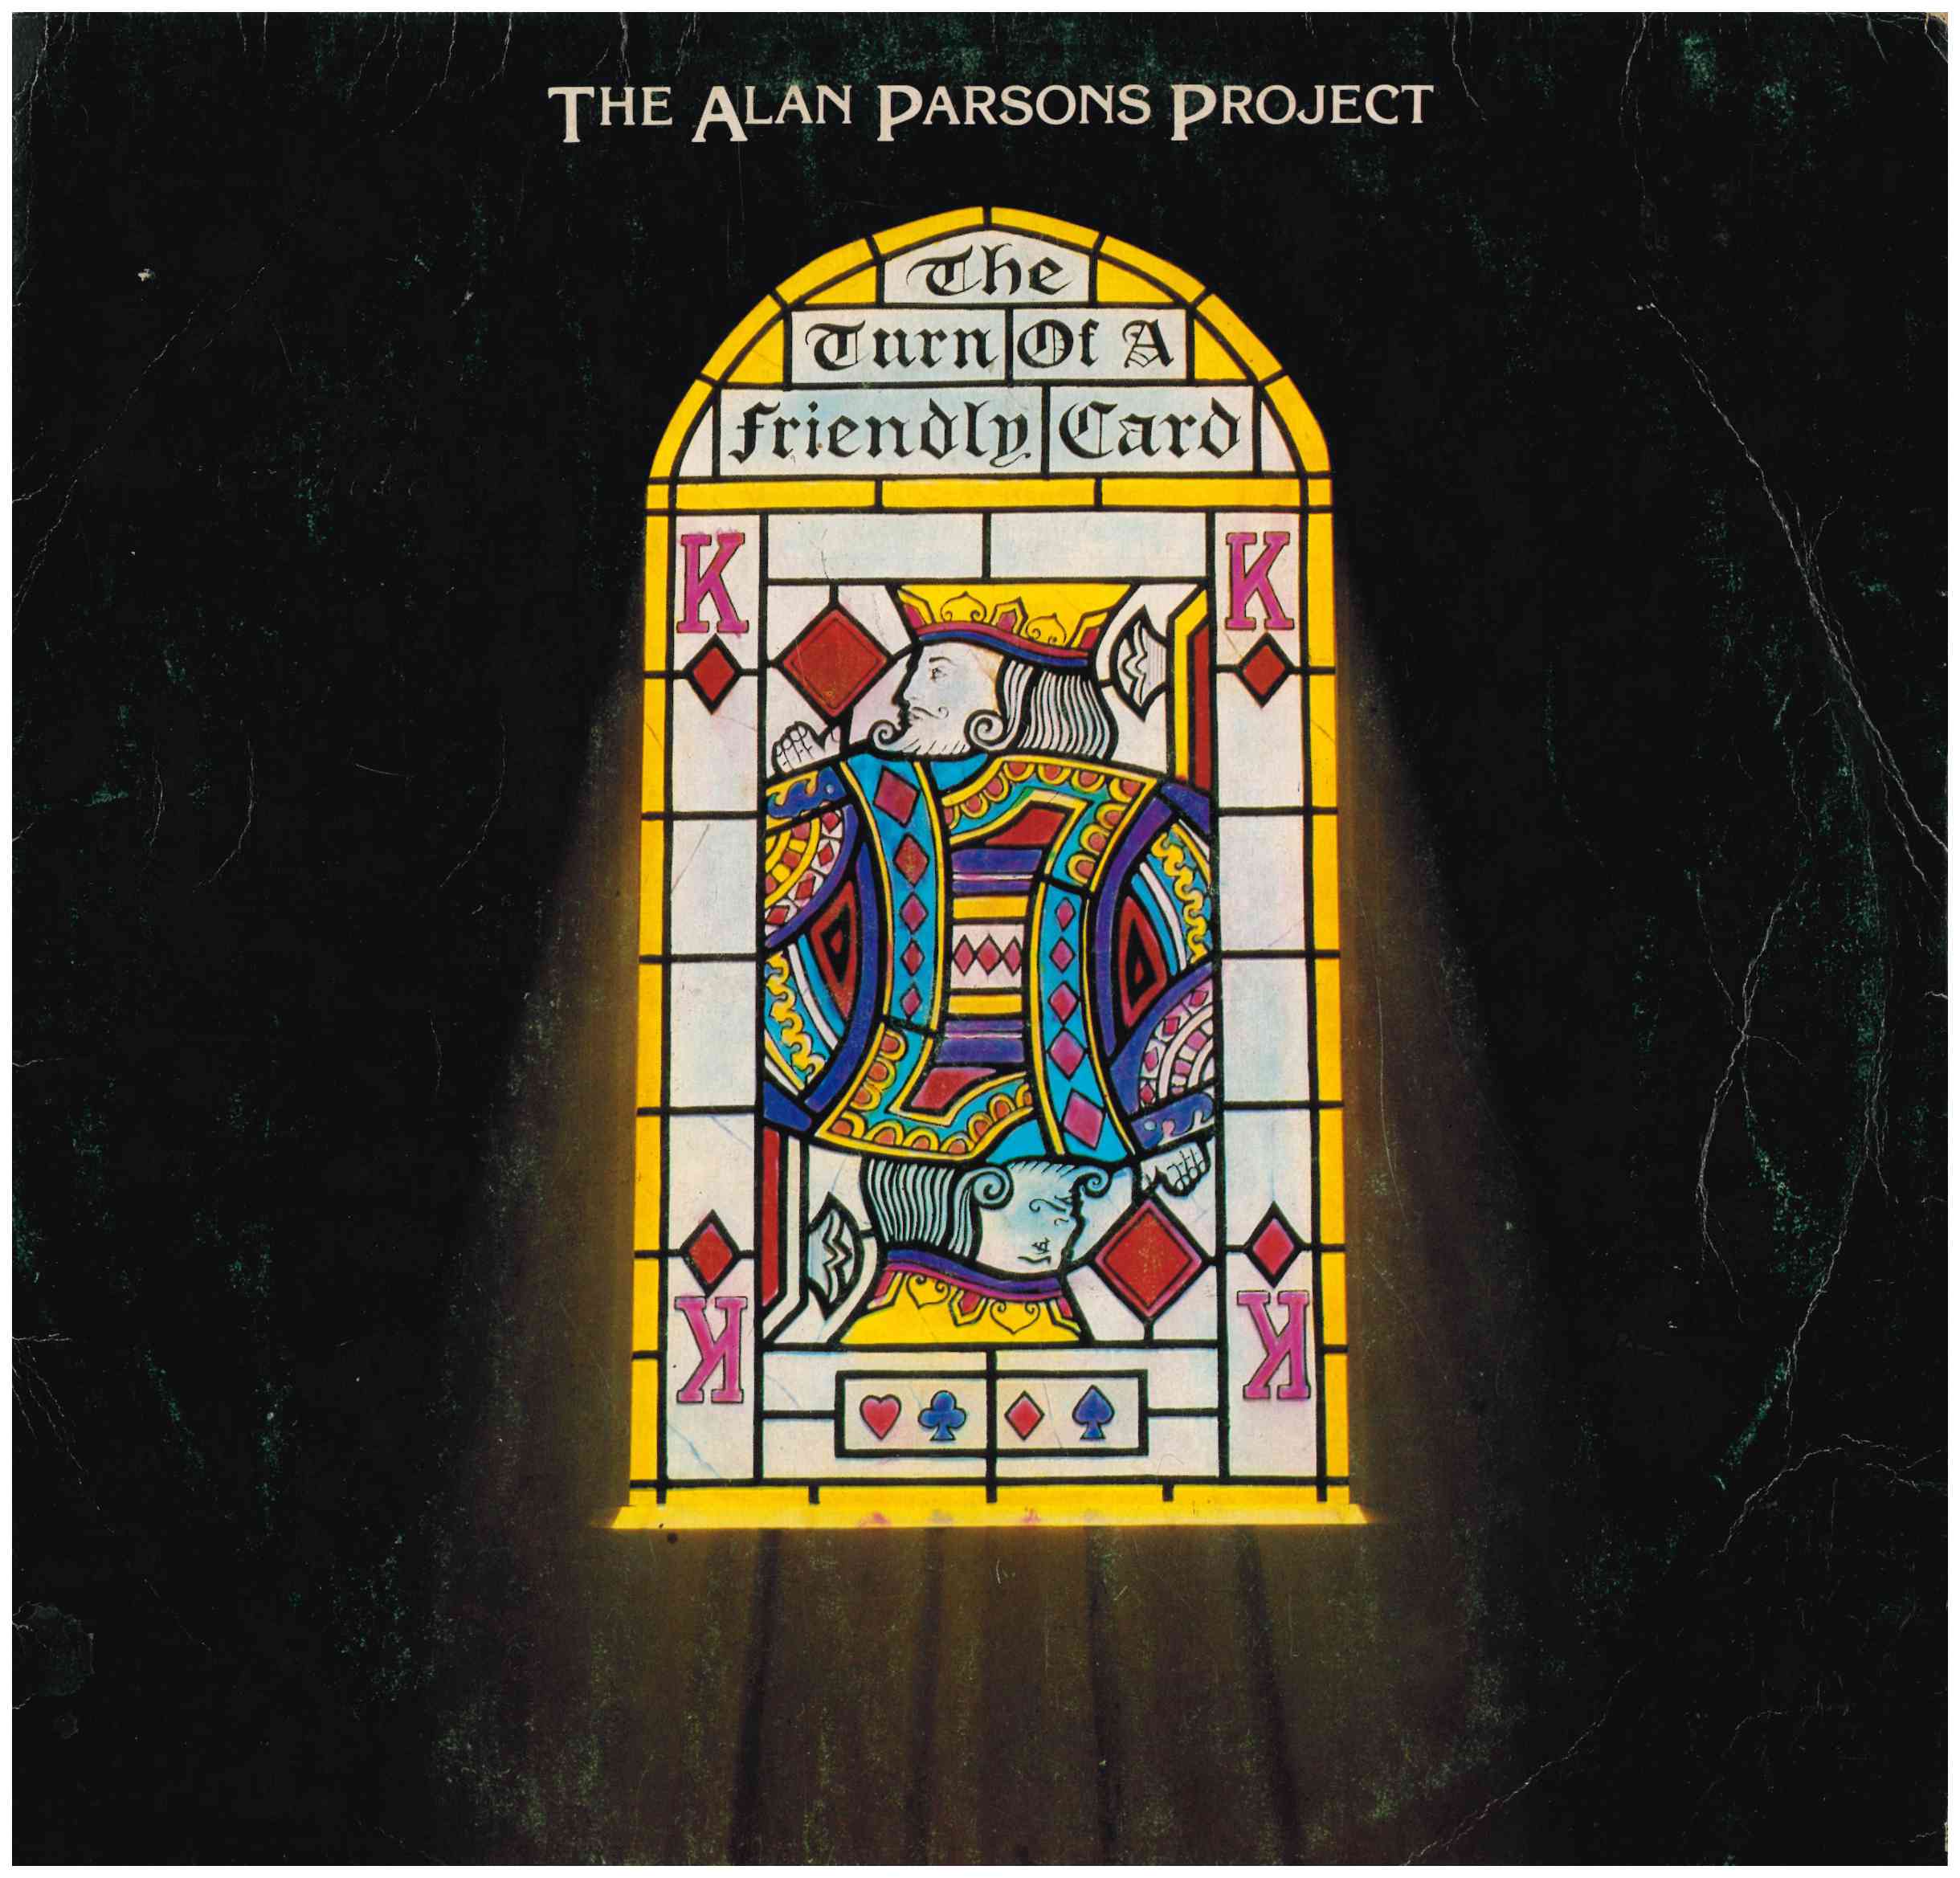 The Alan Parson Project. The Turn of a friendly card. Arista 1980 (I-203000)